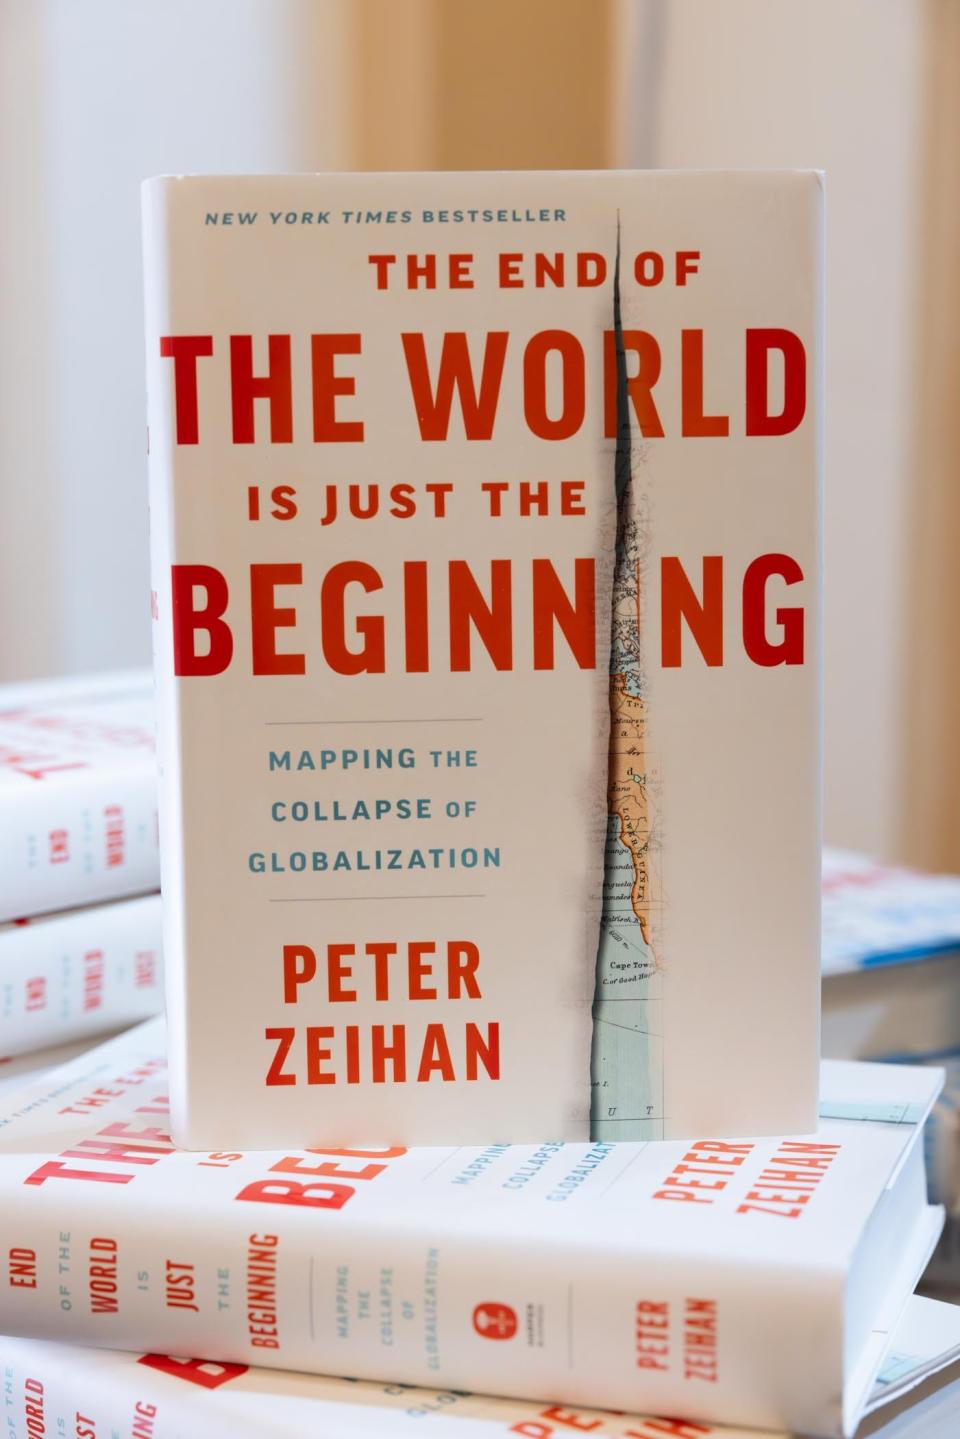 An author with five books under his belt, Peter Zeihan's most recent publication, "The End of the World is Just the Beginning," cover's his bleak prediction of the future of global politics, including the collapse of China and an abrupt deceleration of economic growth.